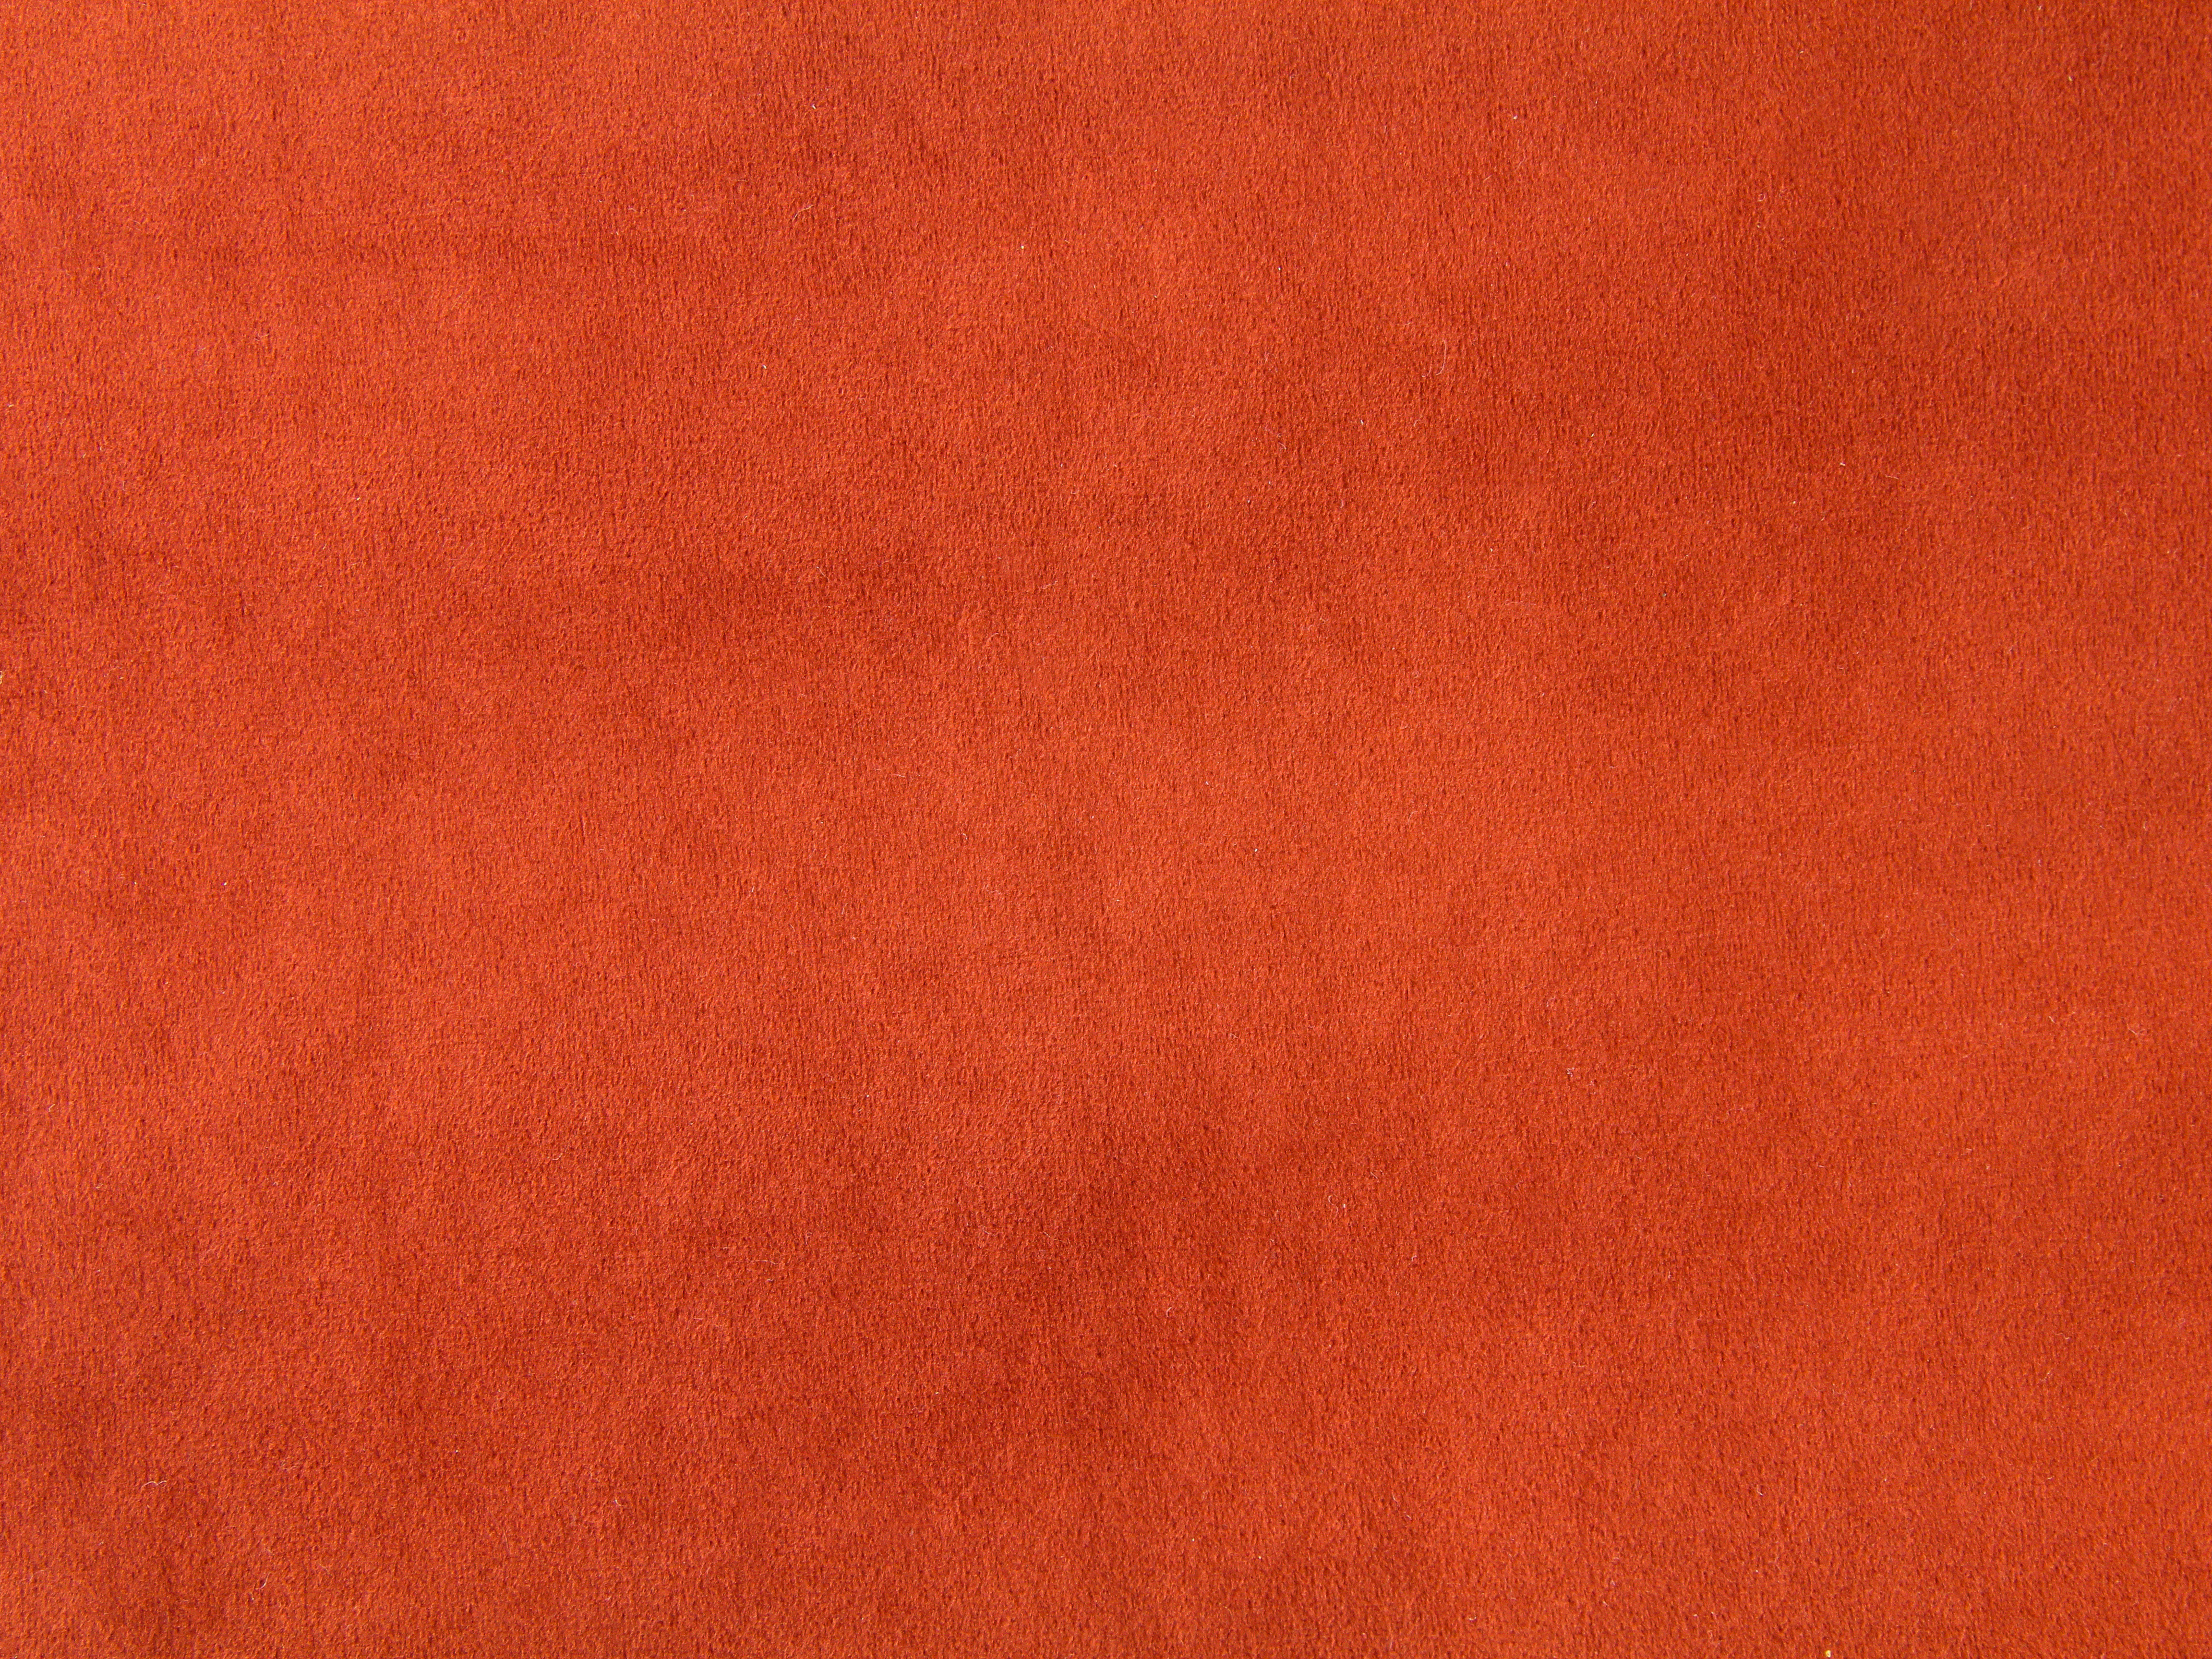 Fabric Textures Red Texture Suede Cloth Stock Photo Fuzzy